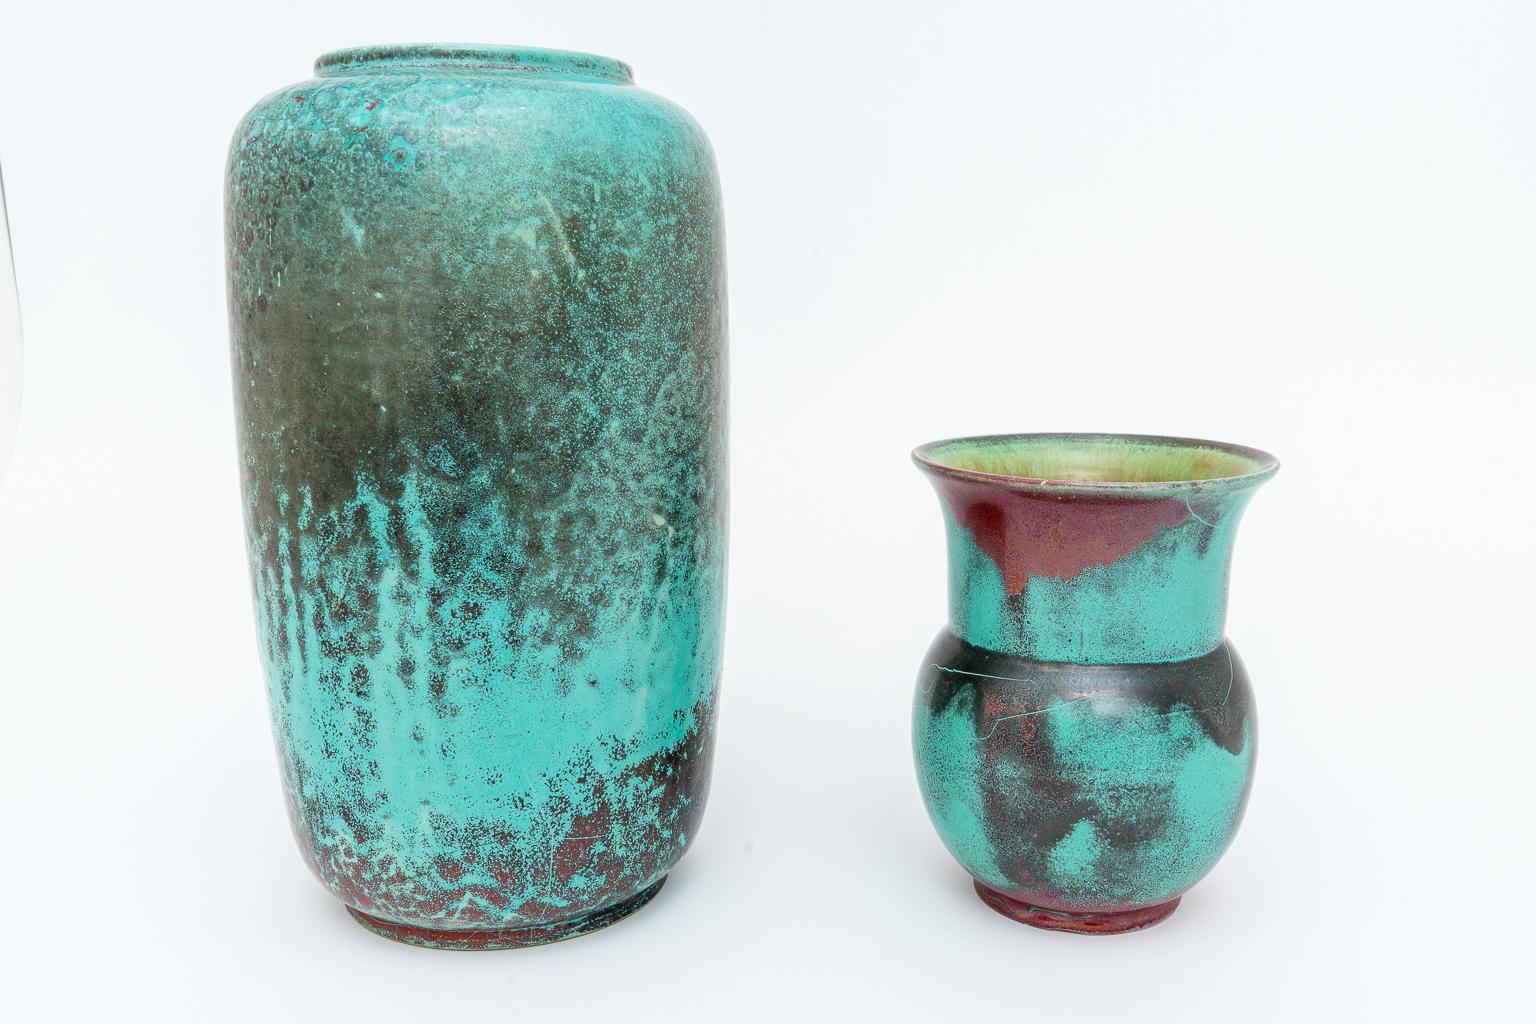 This stylish set of glazed pottery urns were created by the artist Richard Uhlemeyer in the late 1940s and they were acquired from a Palm Beach estate.

The glazes take on a molten, oxidized metallic look and finish of bronze and copper.

Note: